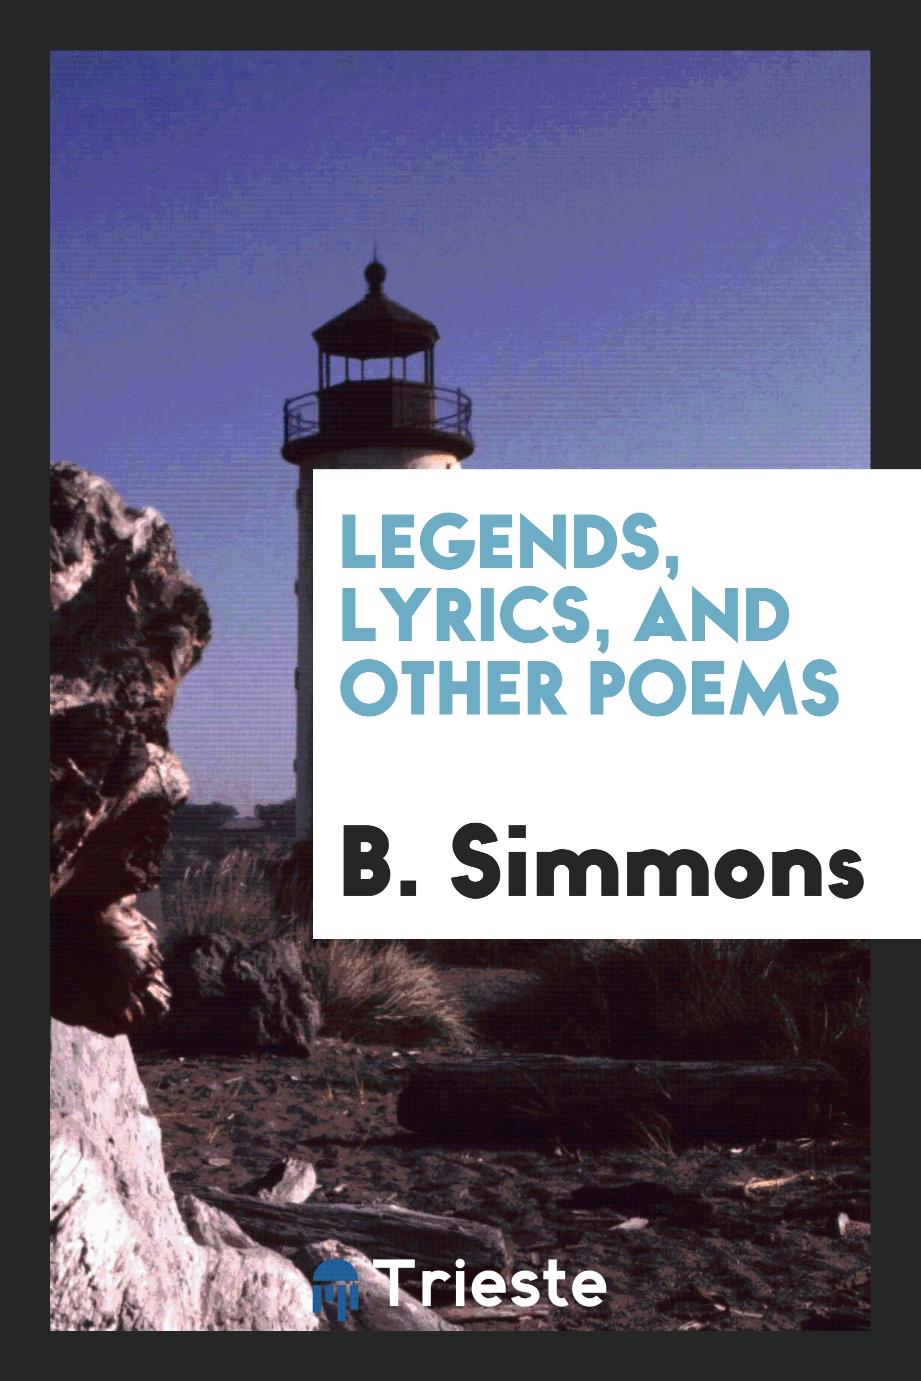 Legends, Lyrics, and Other Poems